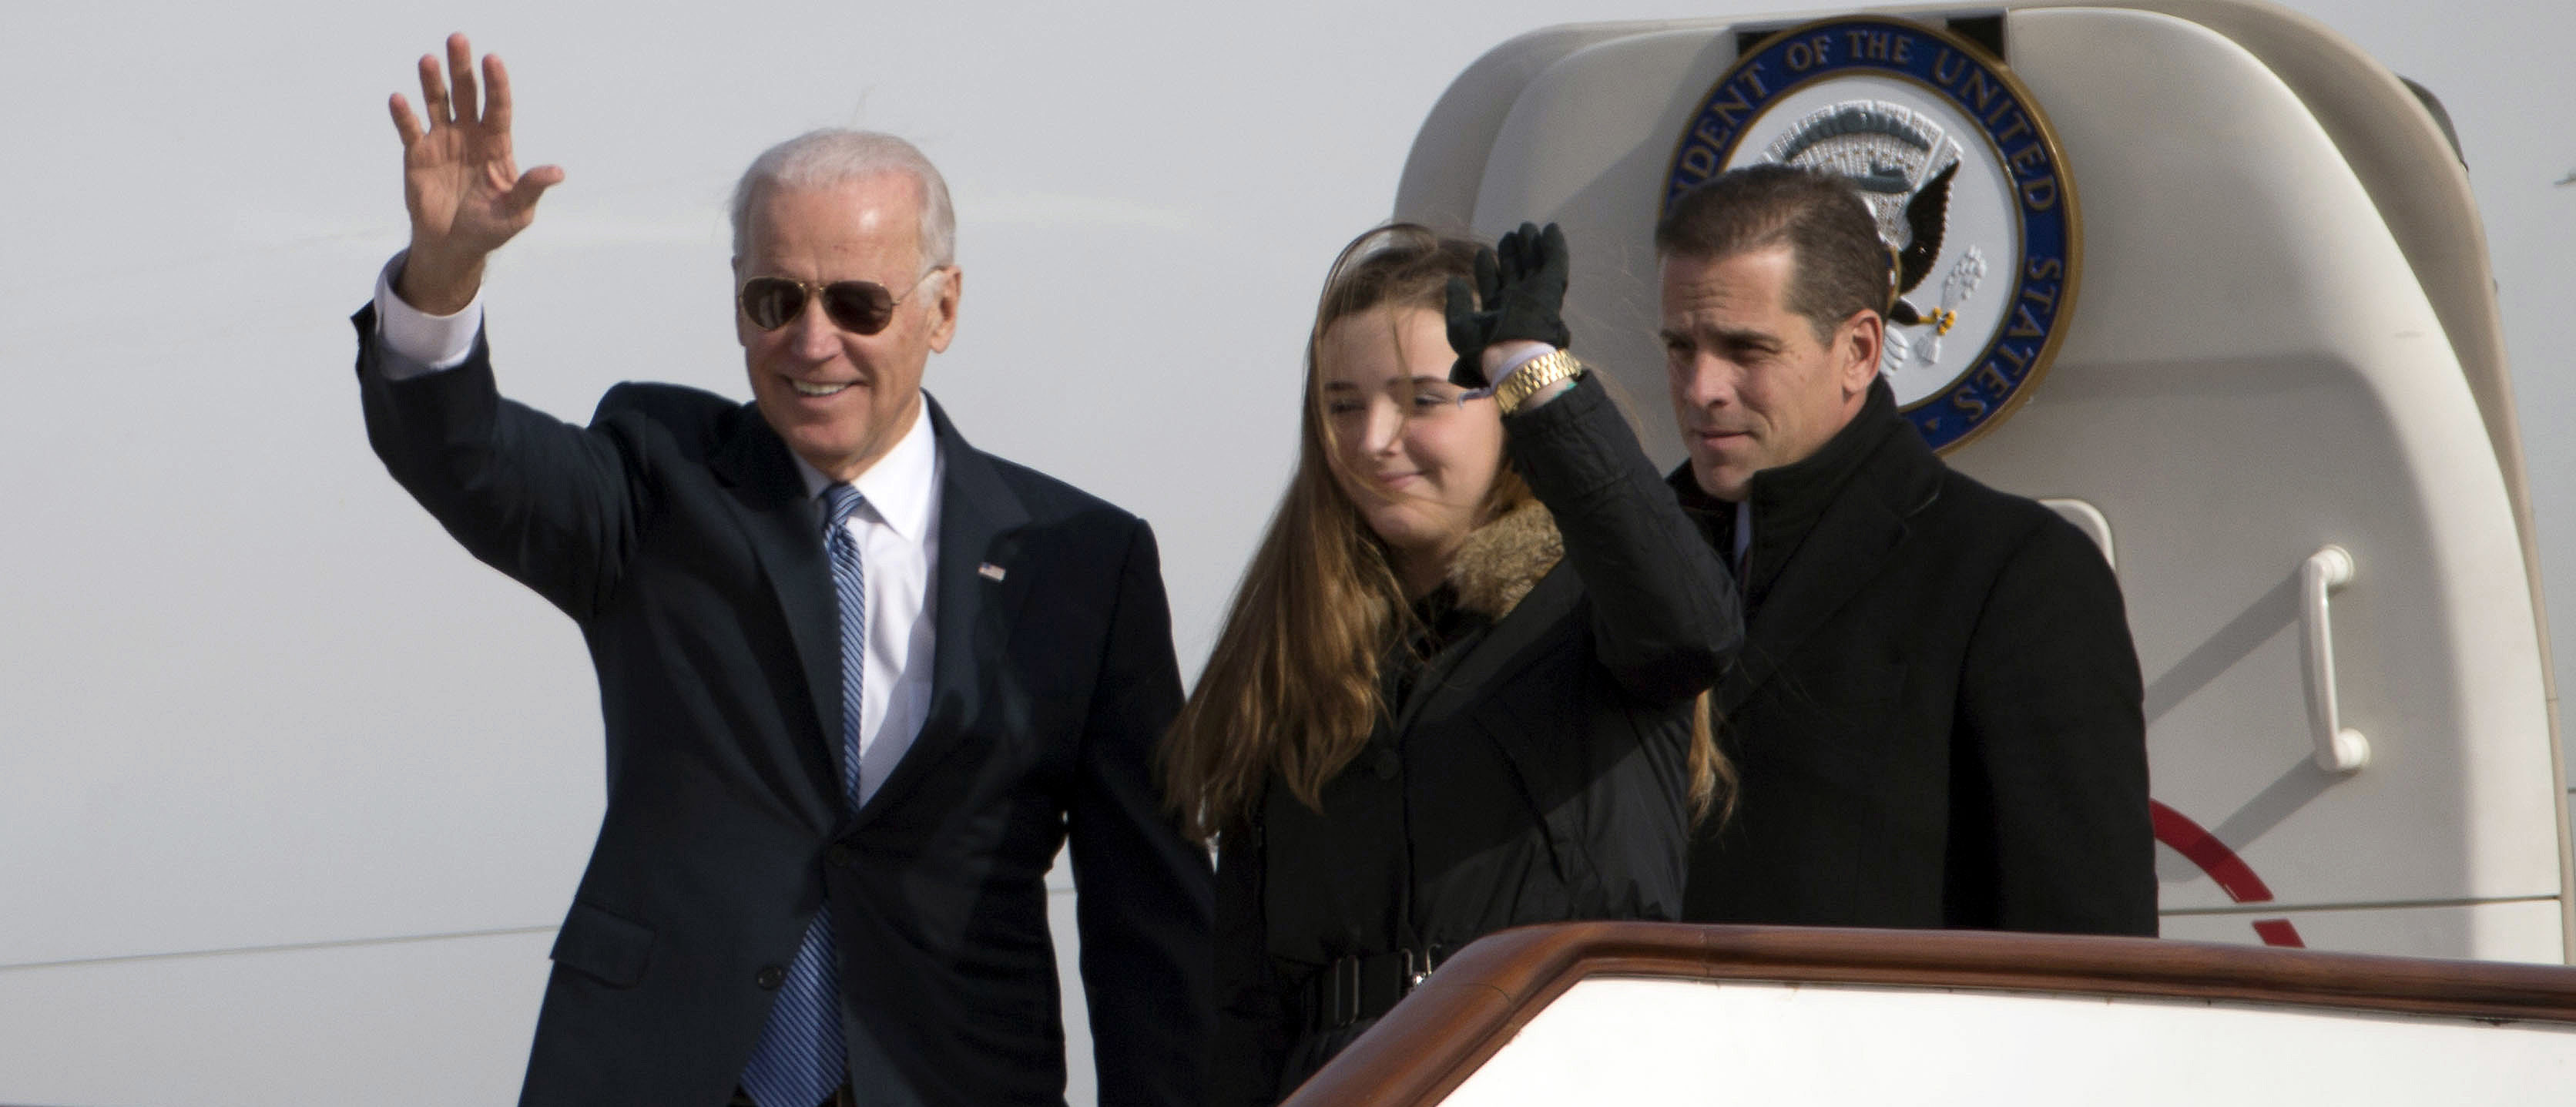 BEIJING, CHINA - DECEMBER 04: U.S. Vice President Joe Biden waves as he walks out of Air Force Two with his granddaughter Finnegan Biden and son Hunter Biden (R) on December 4, 2013 in Beijing, China. Biden is on the first leg of his week-long visit to Asia. (Photo by Ng Han Guan-Pool/Getty Images)